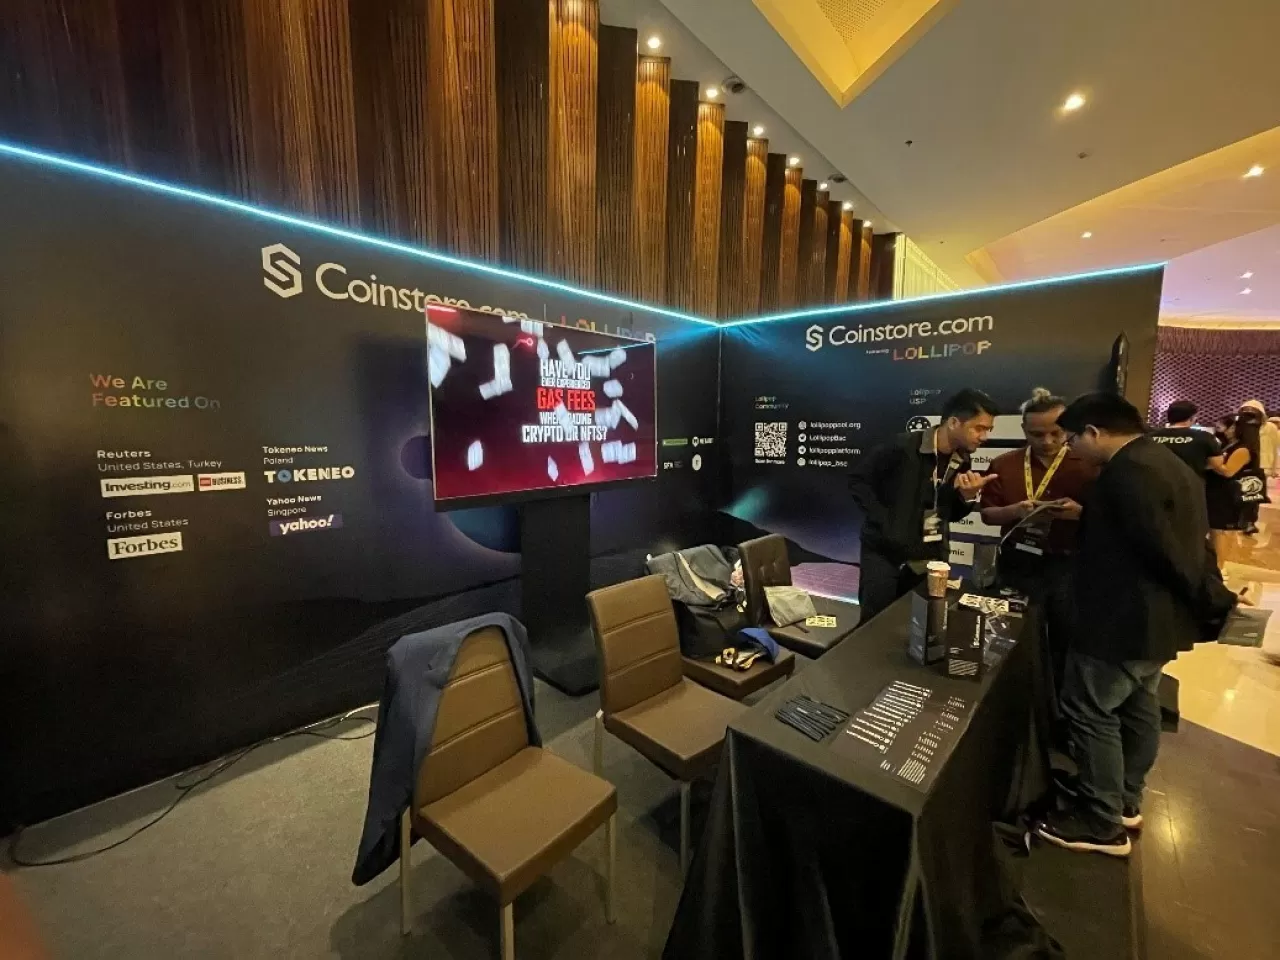 LOLLIPOP booth in partnership with Coinstore img#1